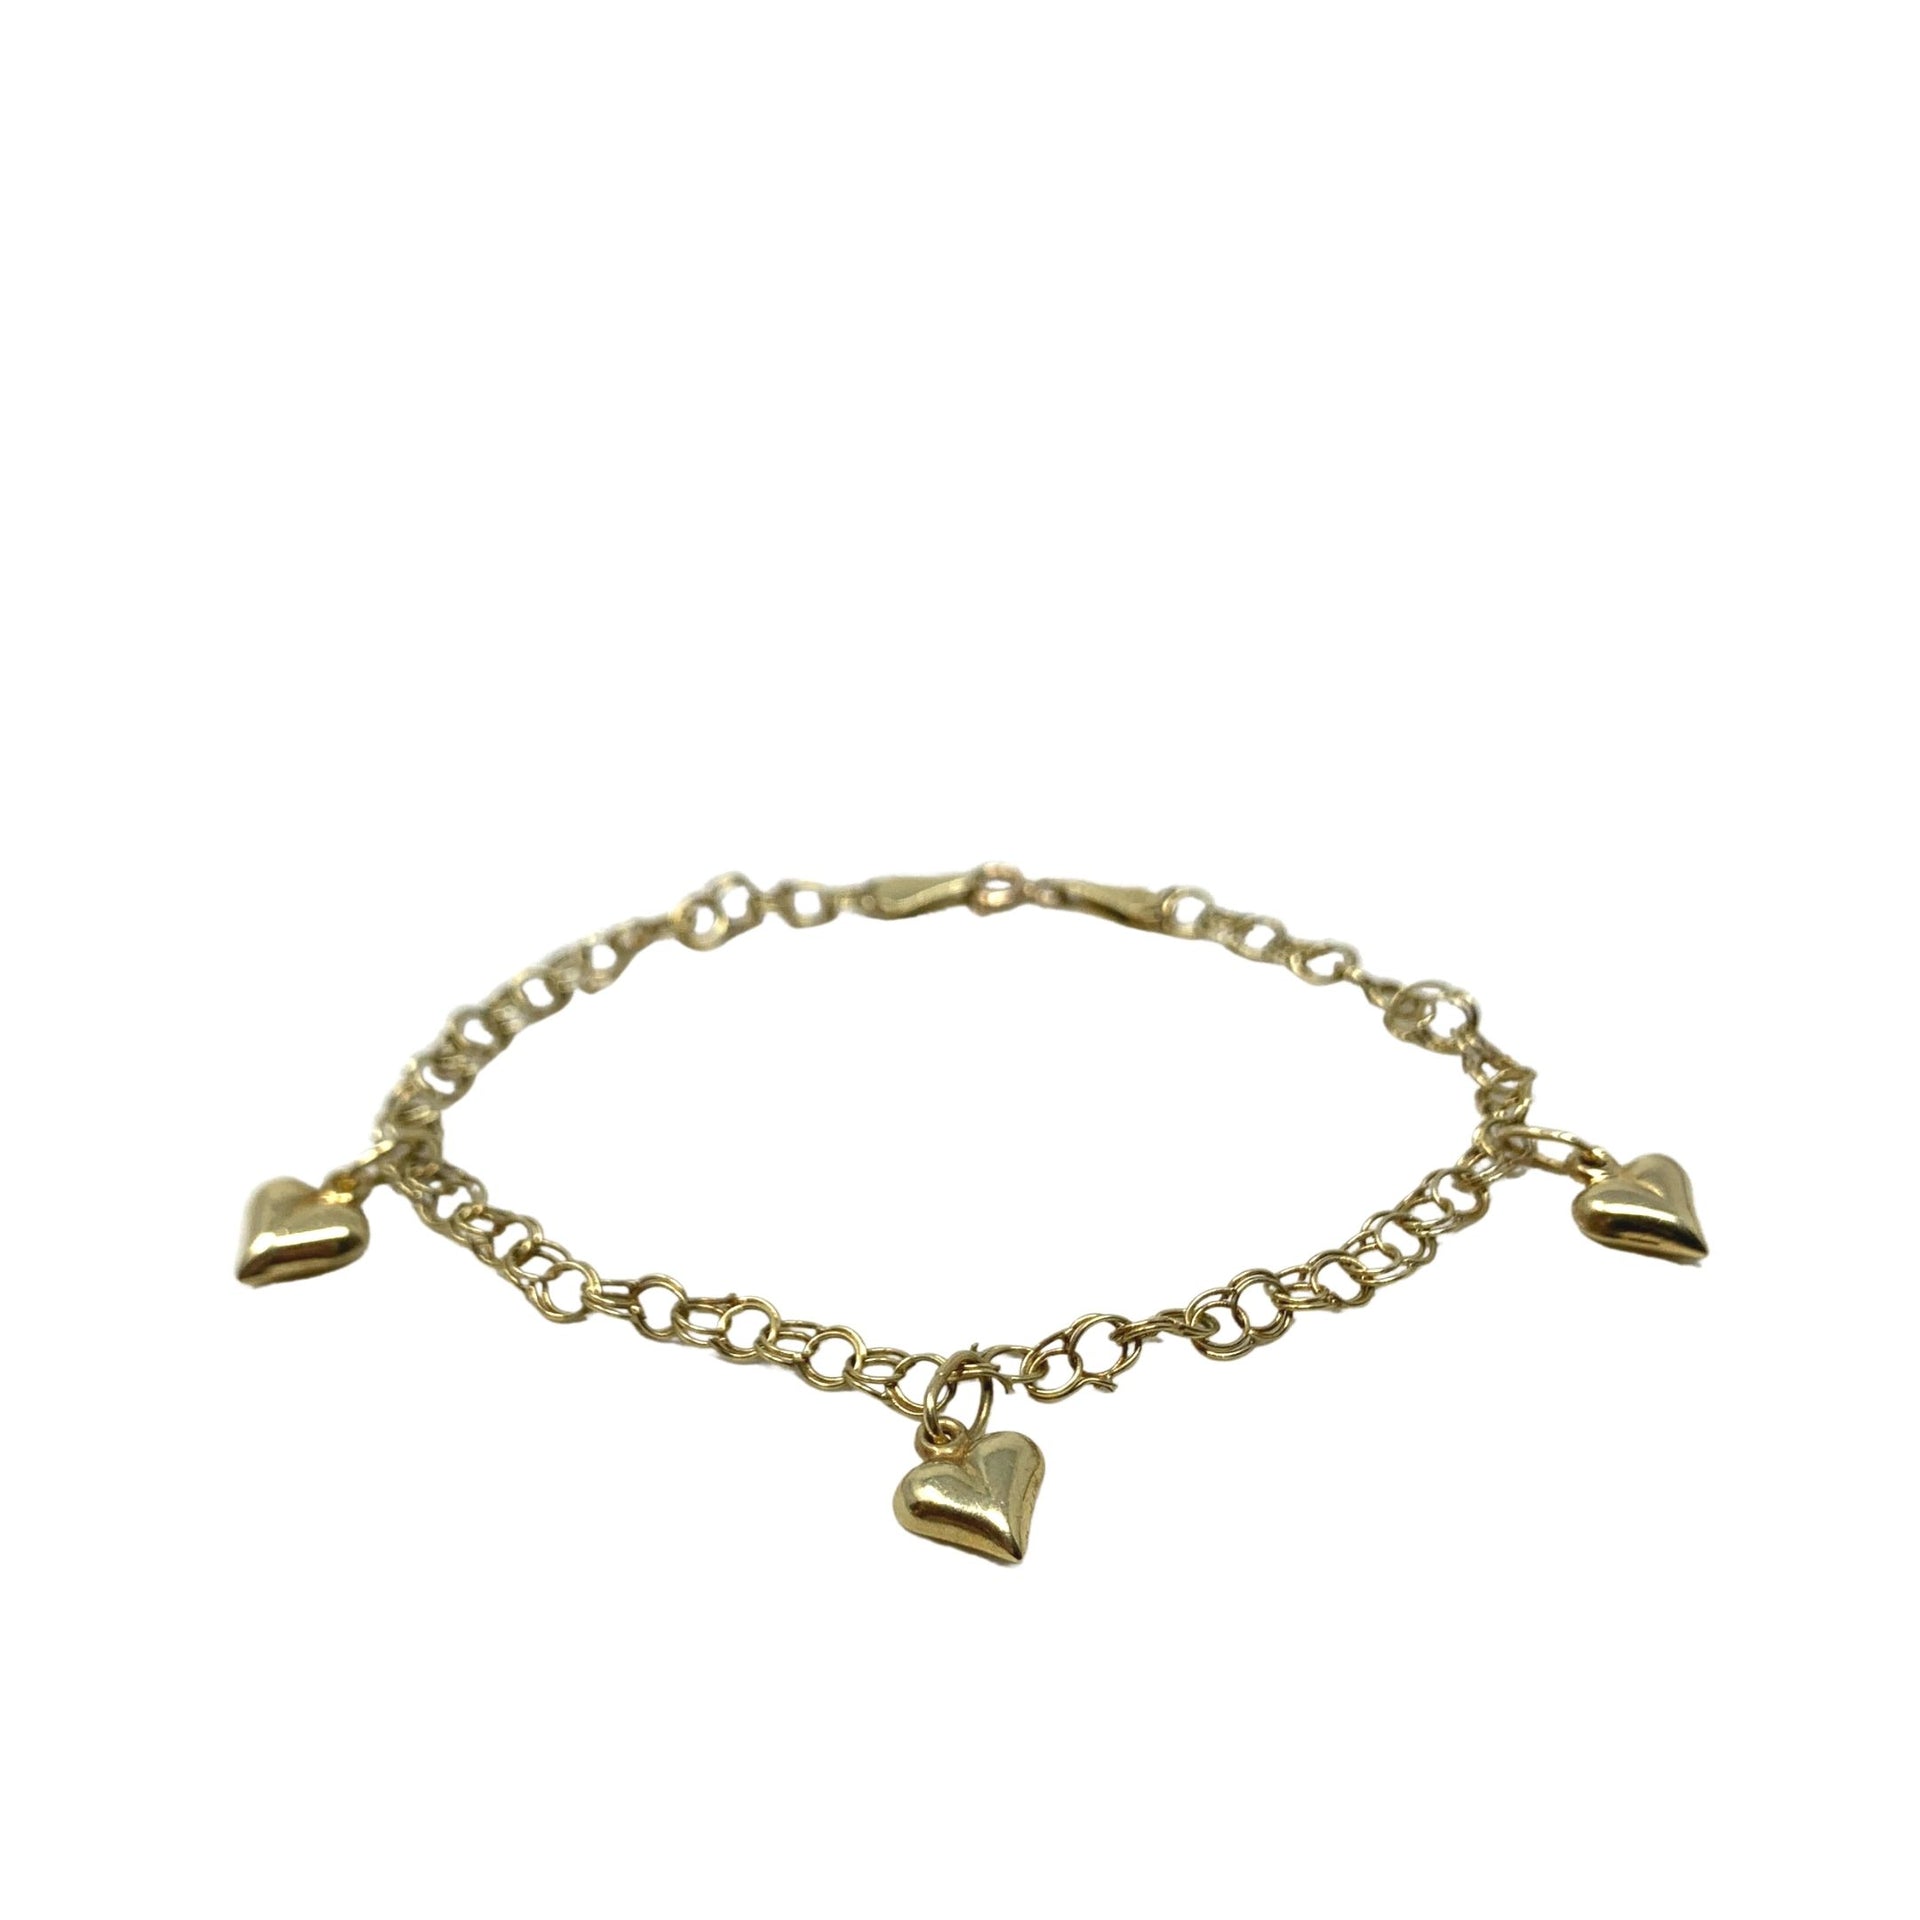 Vintage Solid 10k Yellow Gold Charm Bracelet 7.75 Inches 